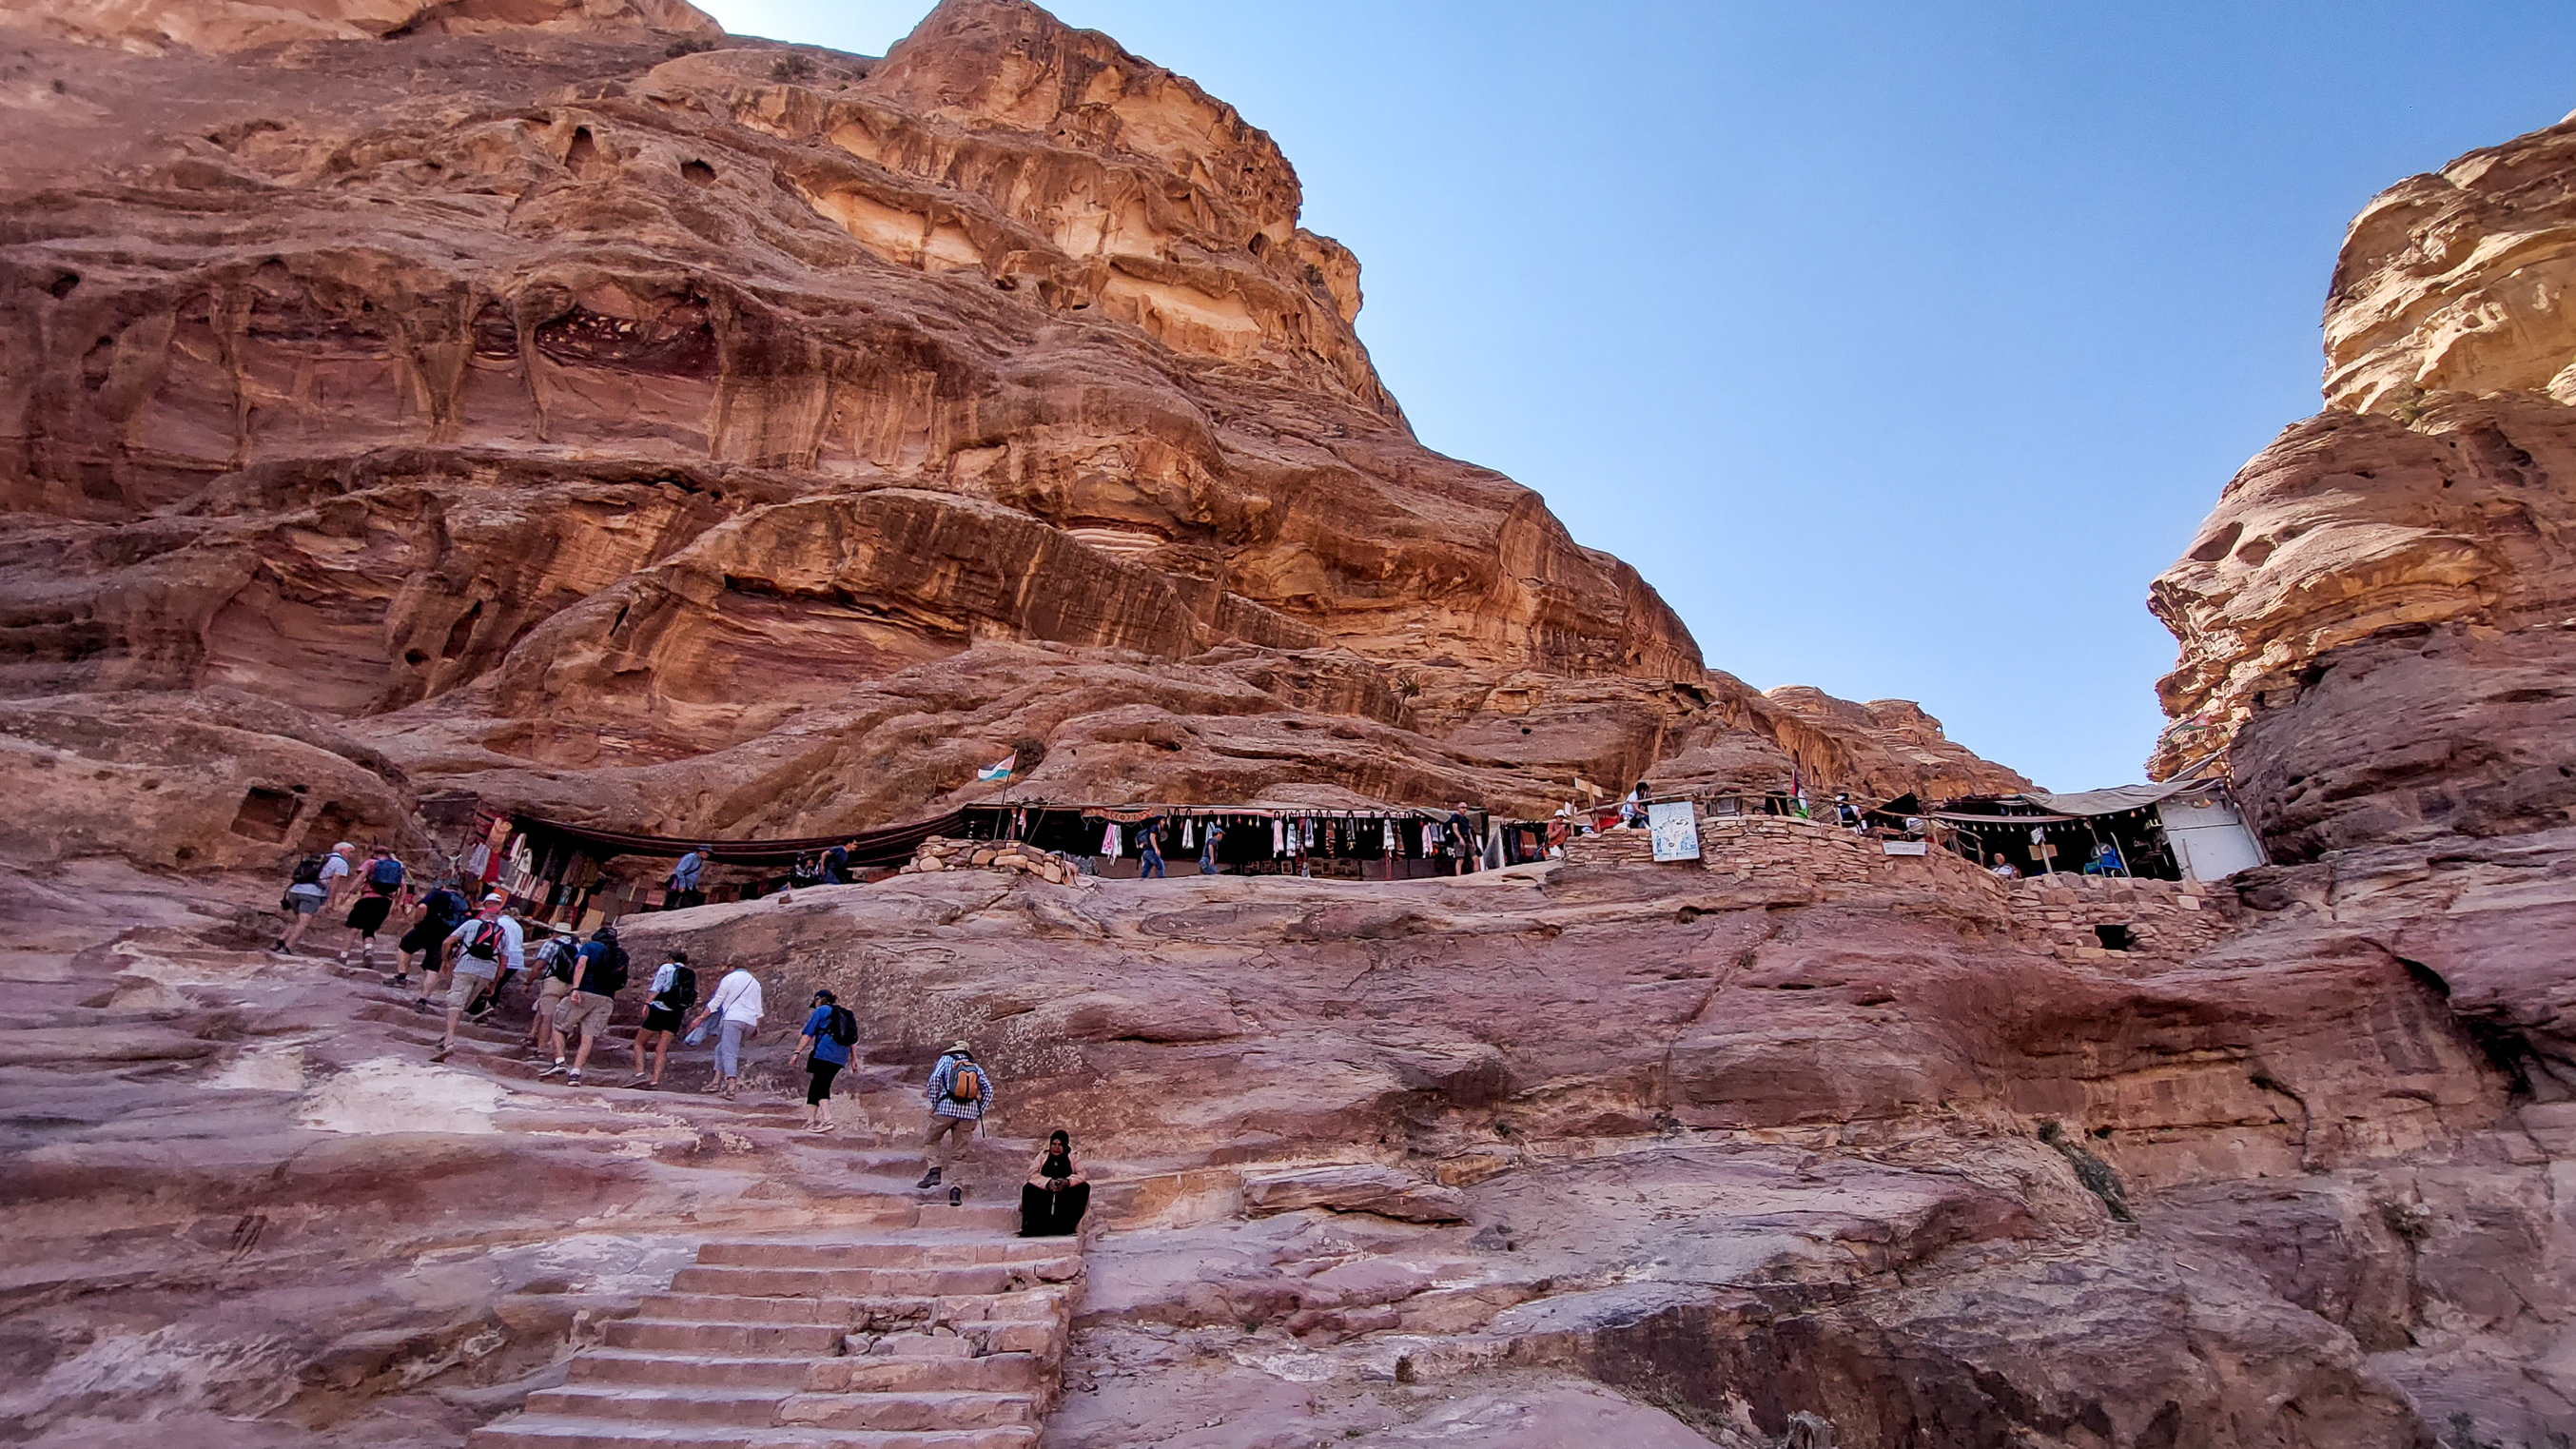 <span  class="uc_style_uc_tiles_grid_image_elementor_uc_items_attribute_title" style="color:#ffffff;">A lot of tourists in Petra</span>